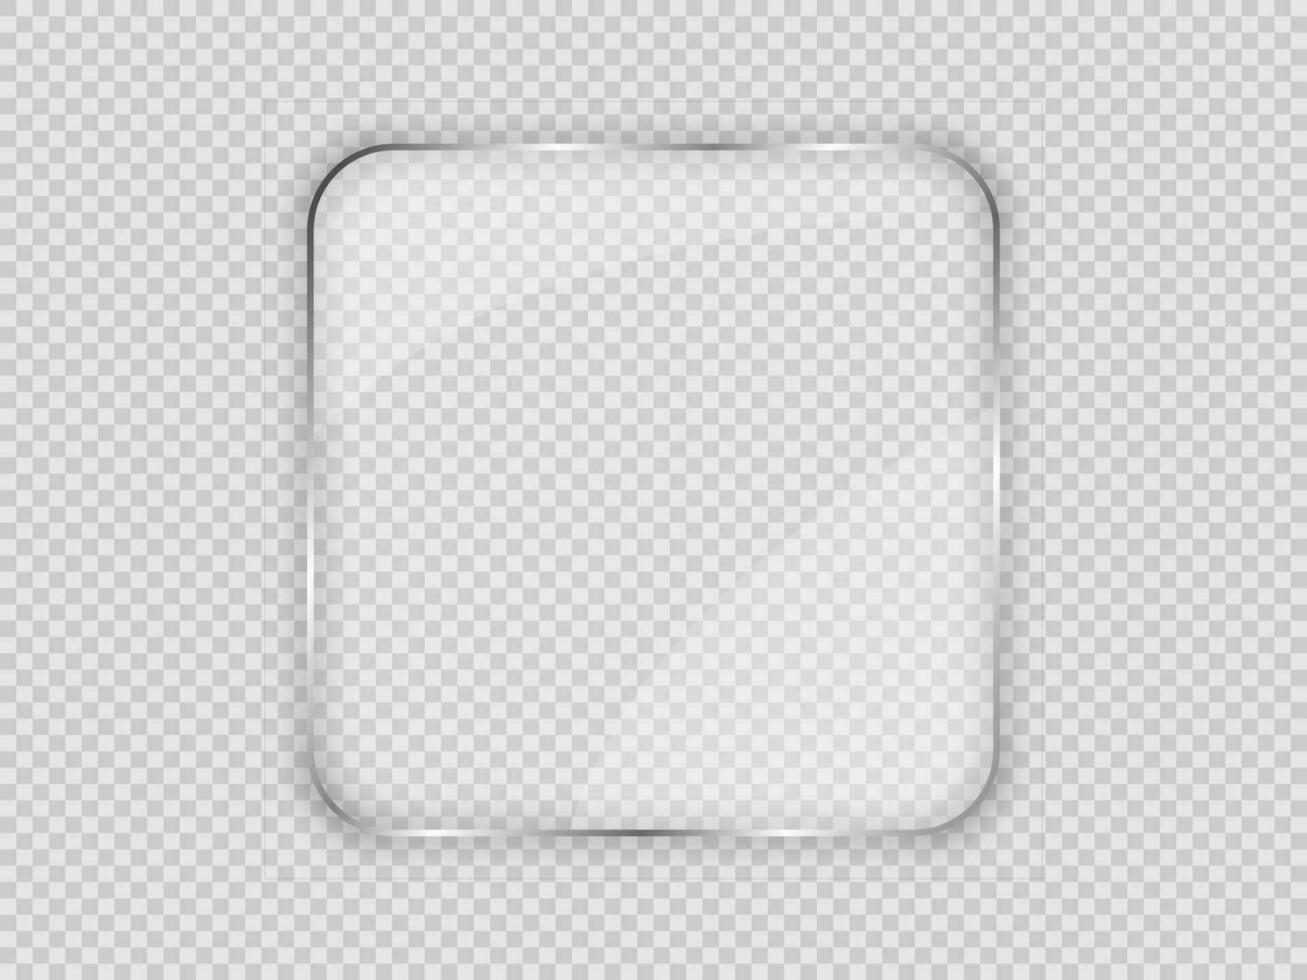 Glass plate in rounded square frame vector